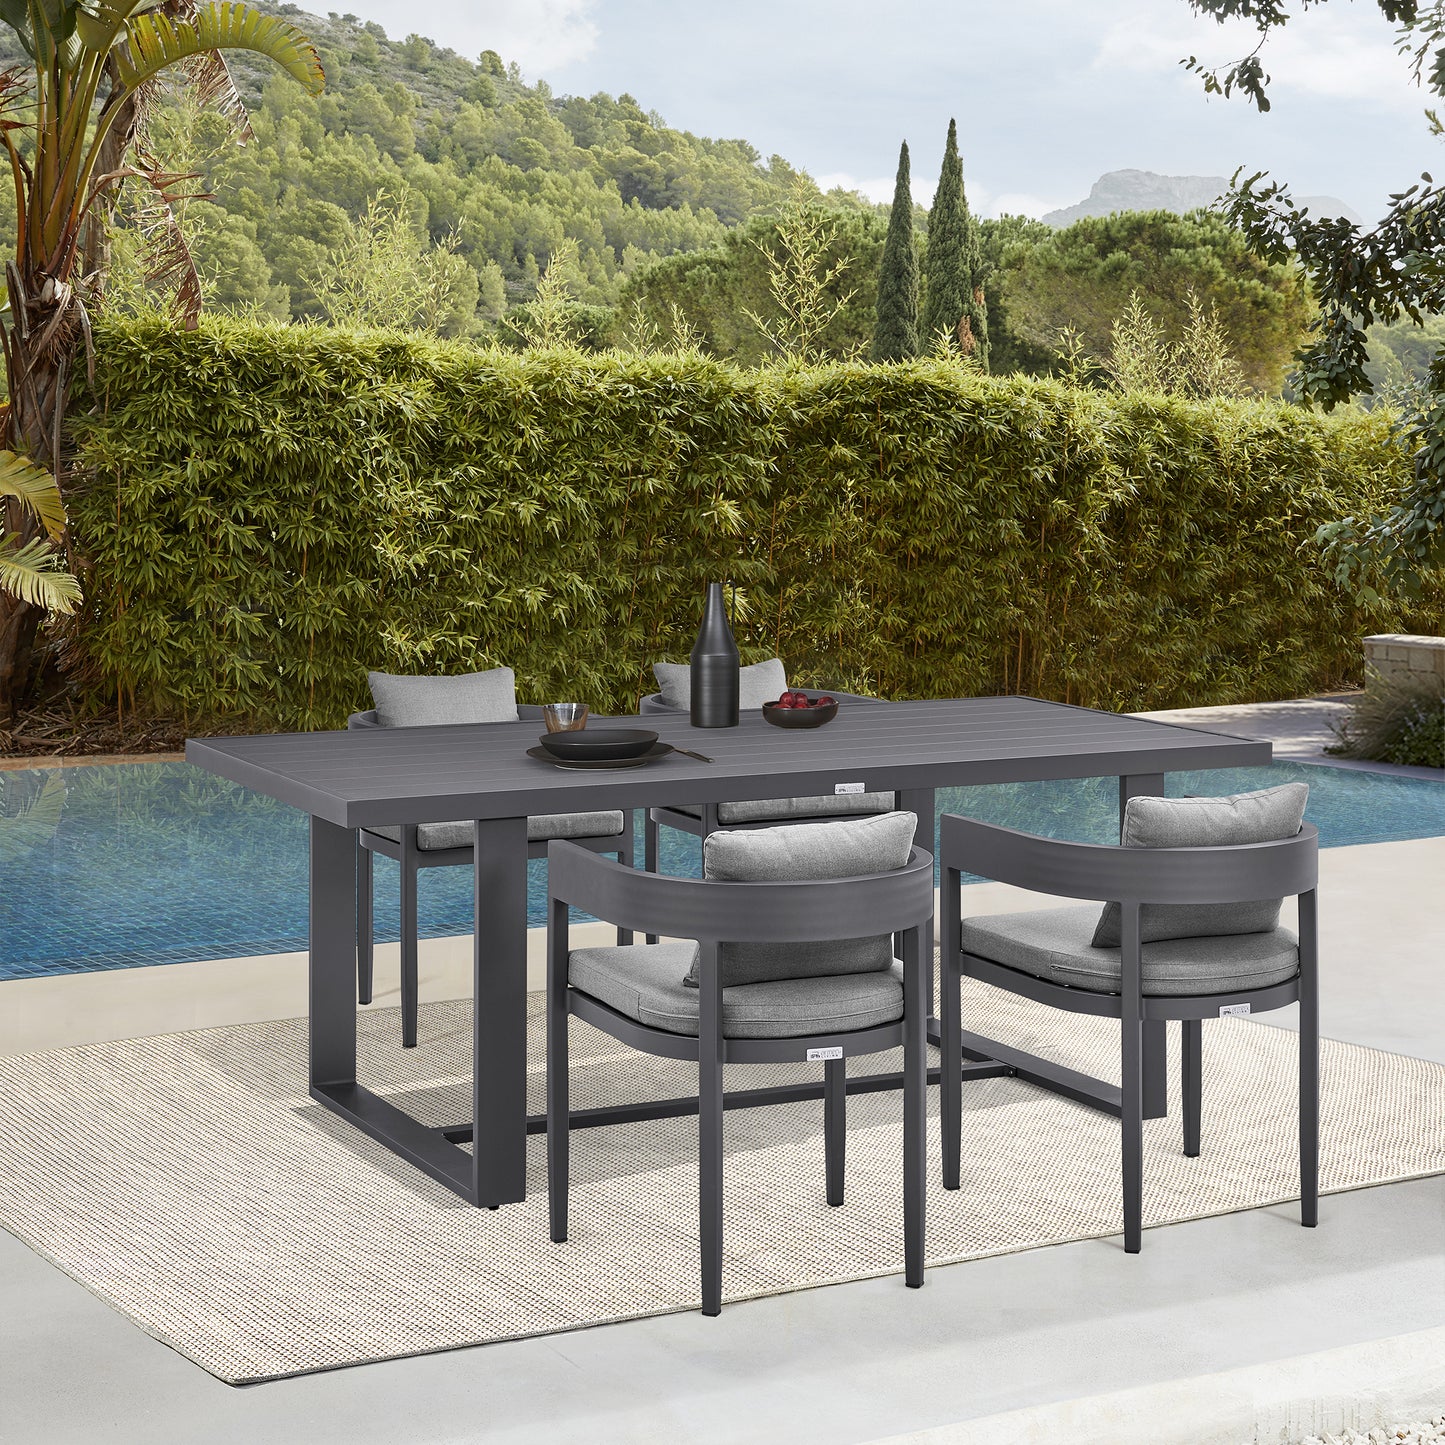 Argiope Outdoor Patio 5-Piece Dining Table Set in Aluminum with Gray Cushions